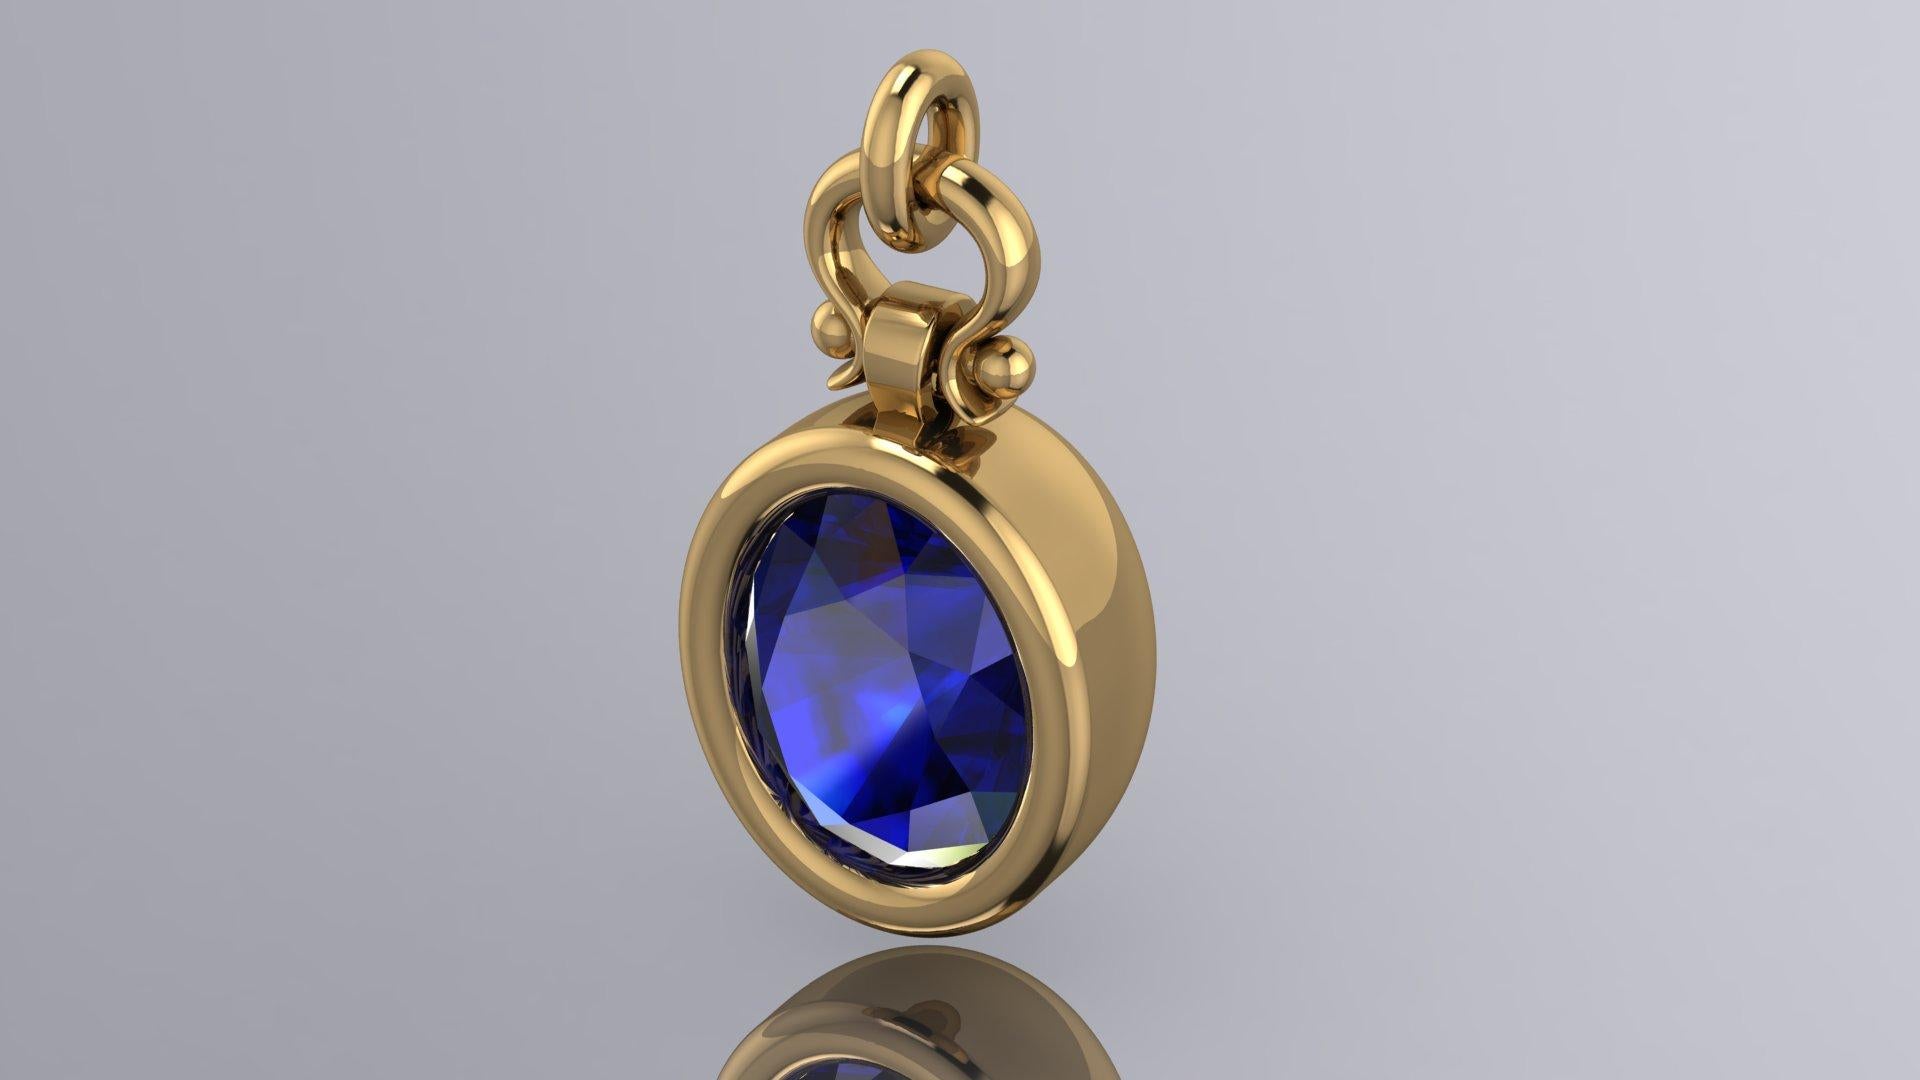 Berberyn Certified 4.28 Carat Oval Blue Sapphire Pendant Necklace in 18k In New Condition For Sale In Chicago, IL